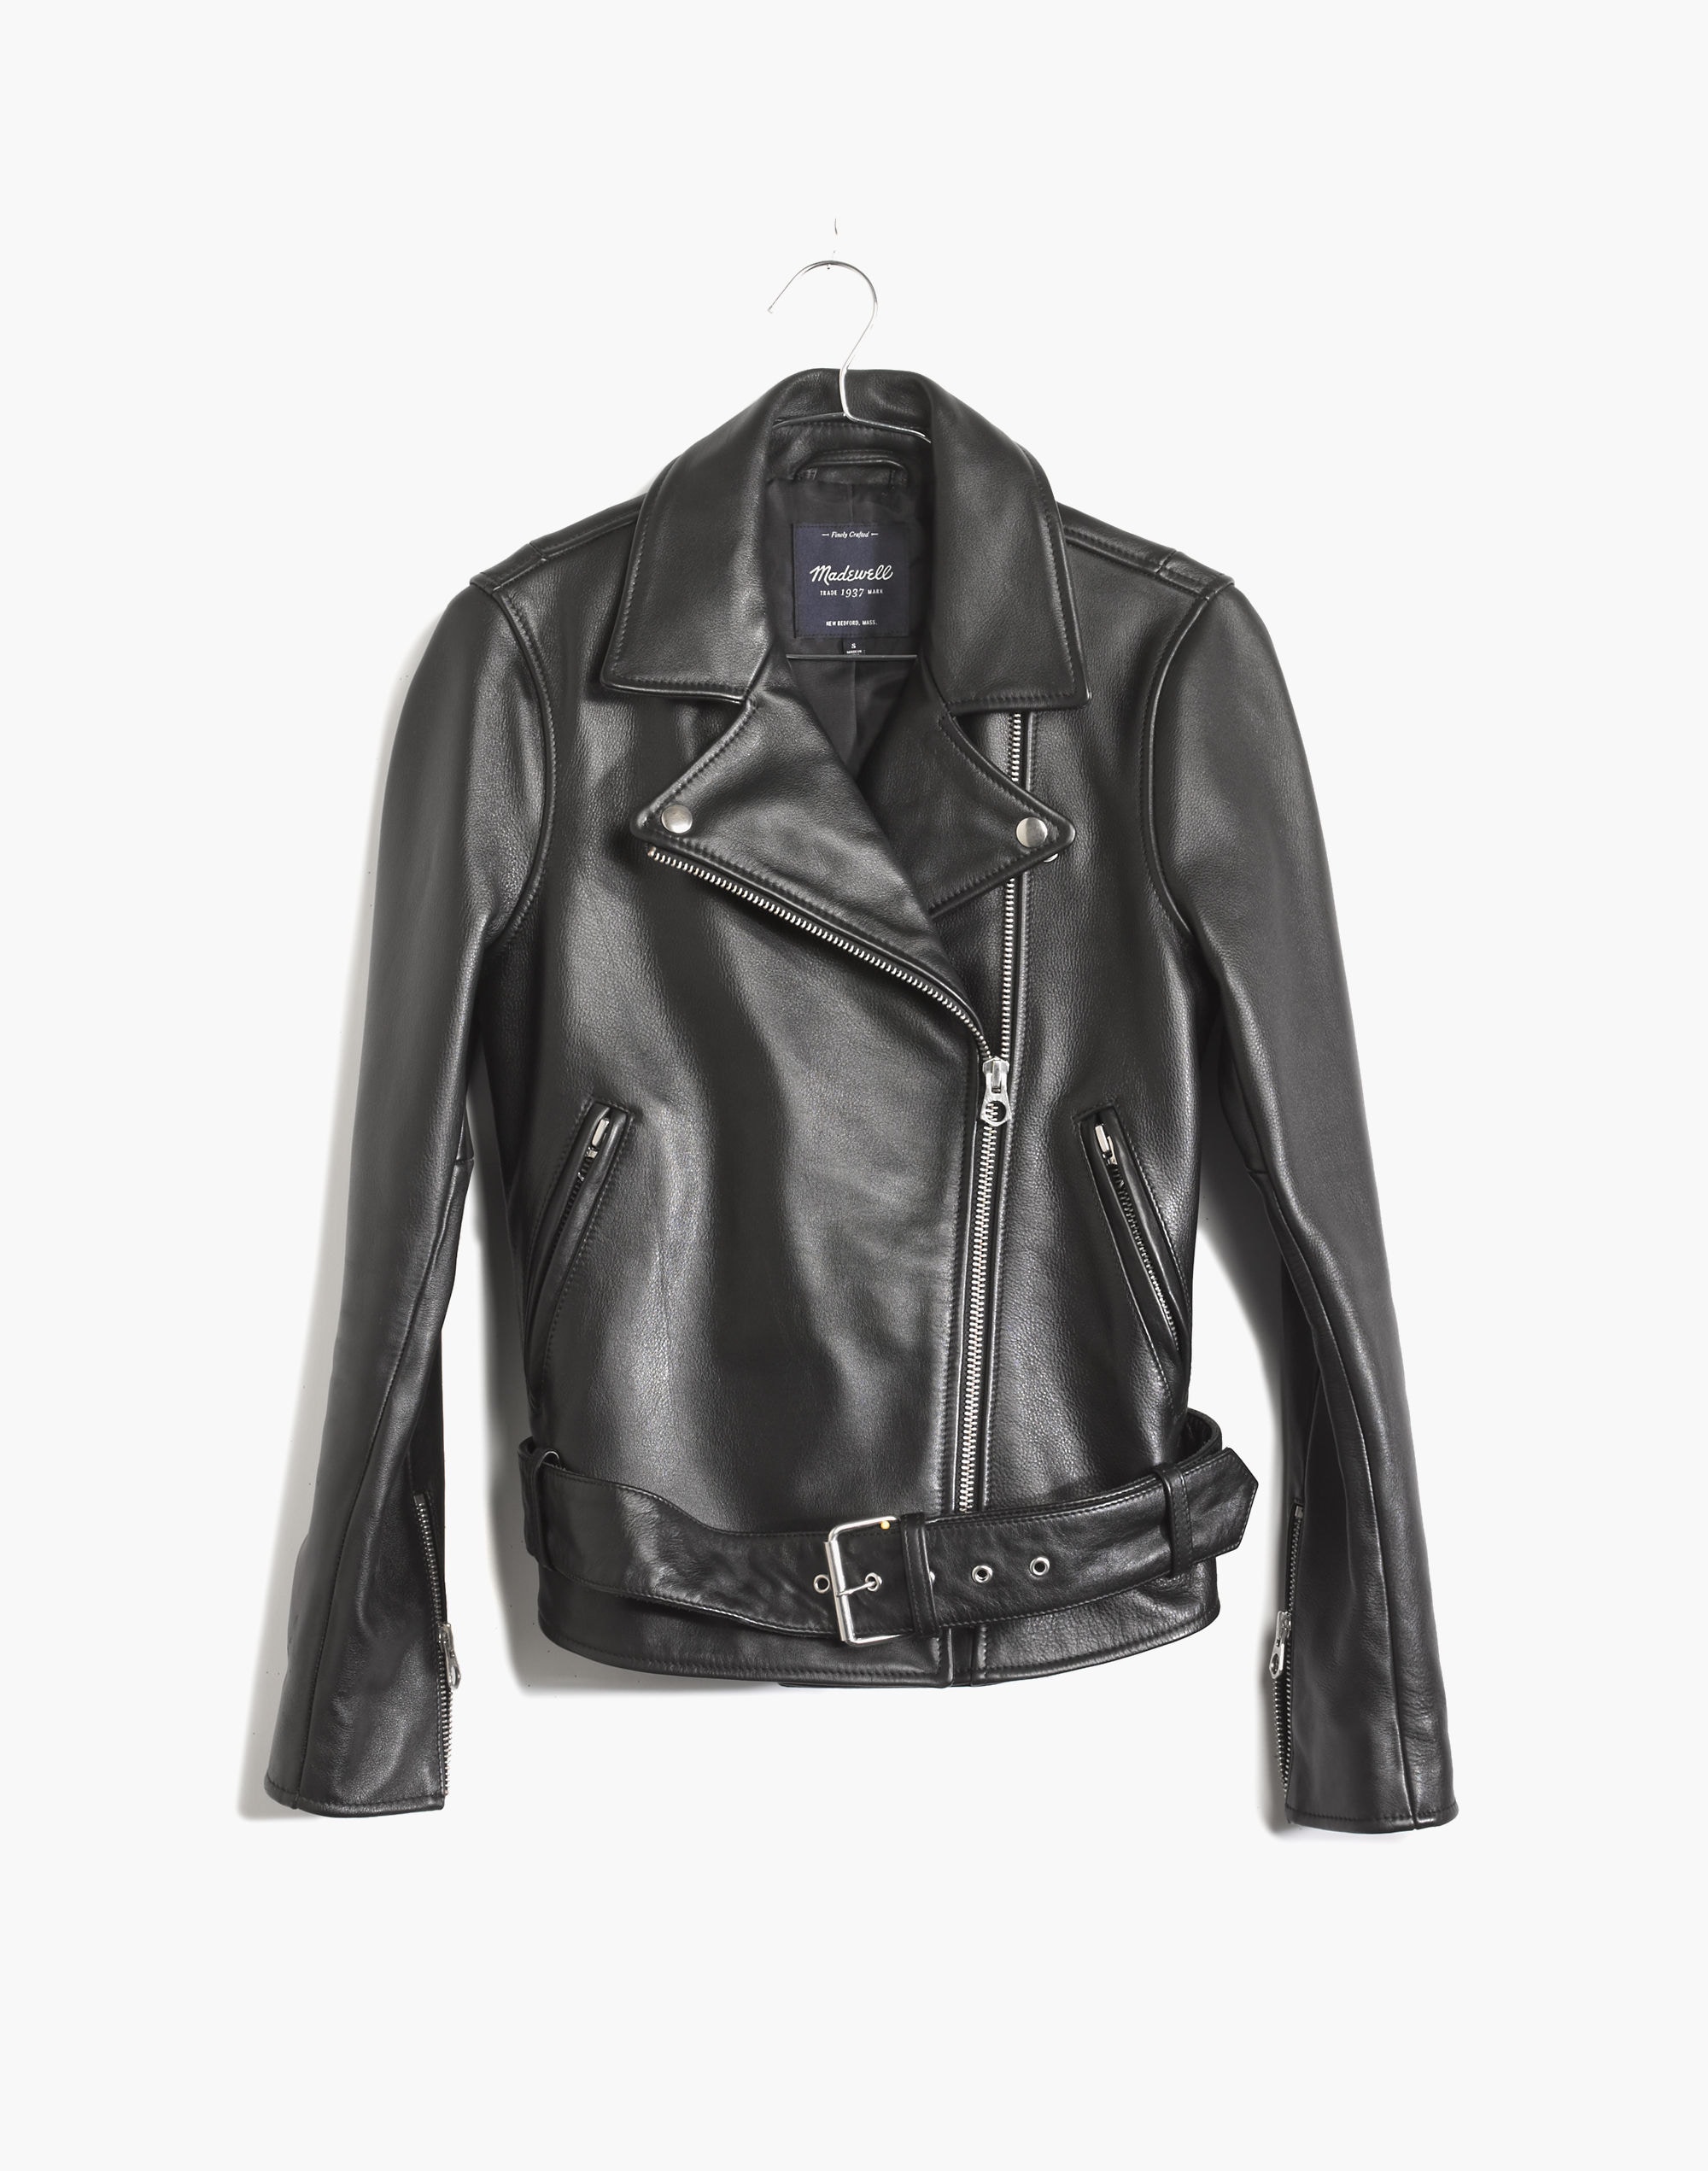 The Ultimate Leather Motorcycle Jacket